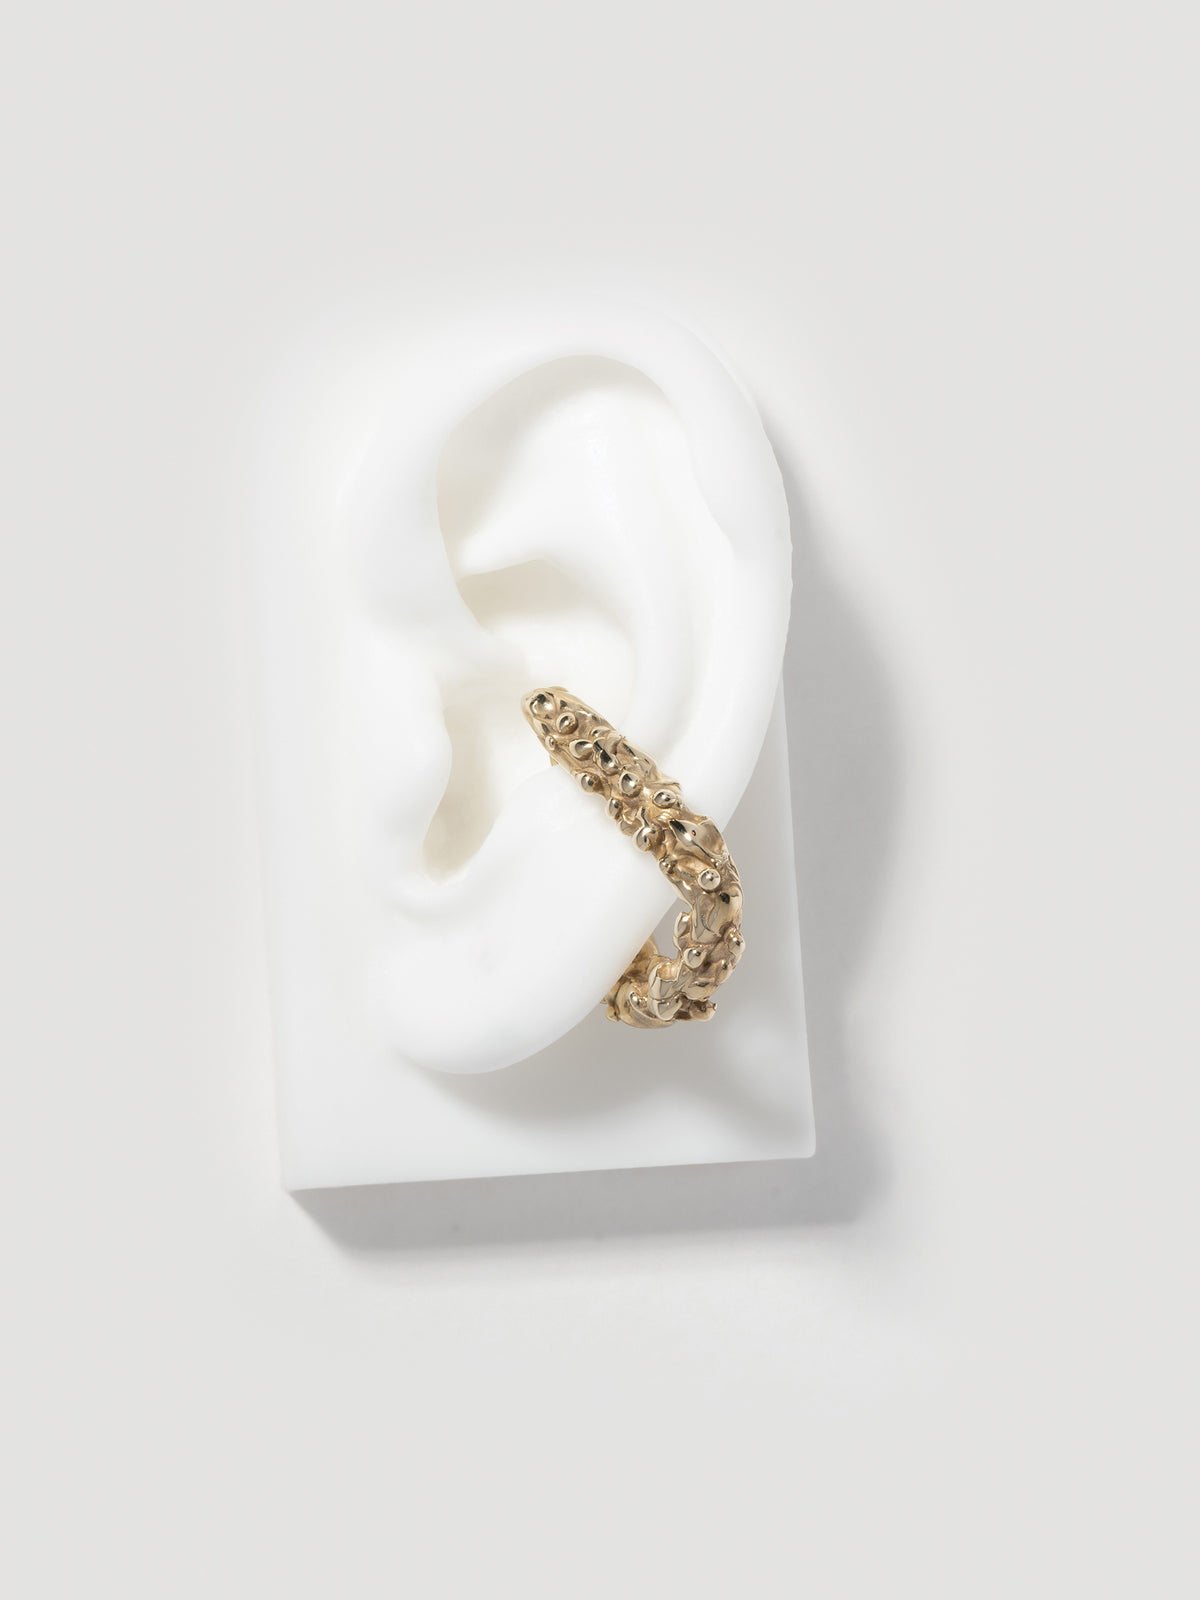 Product image of FARIS ROCA Hang (left ear orientation) in 14k gold plate. Shown on silicone ear. 